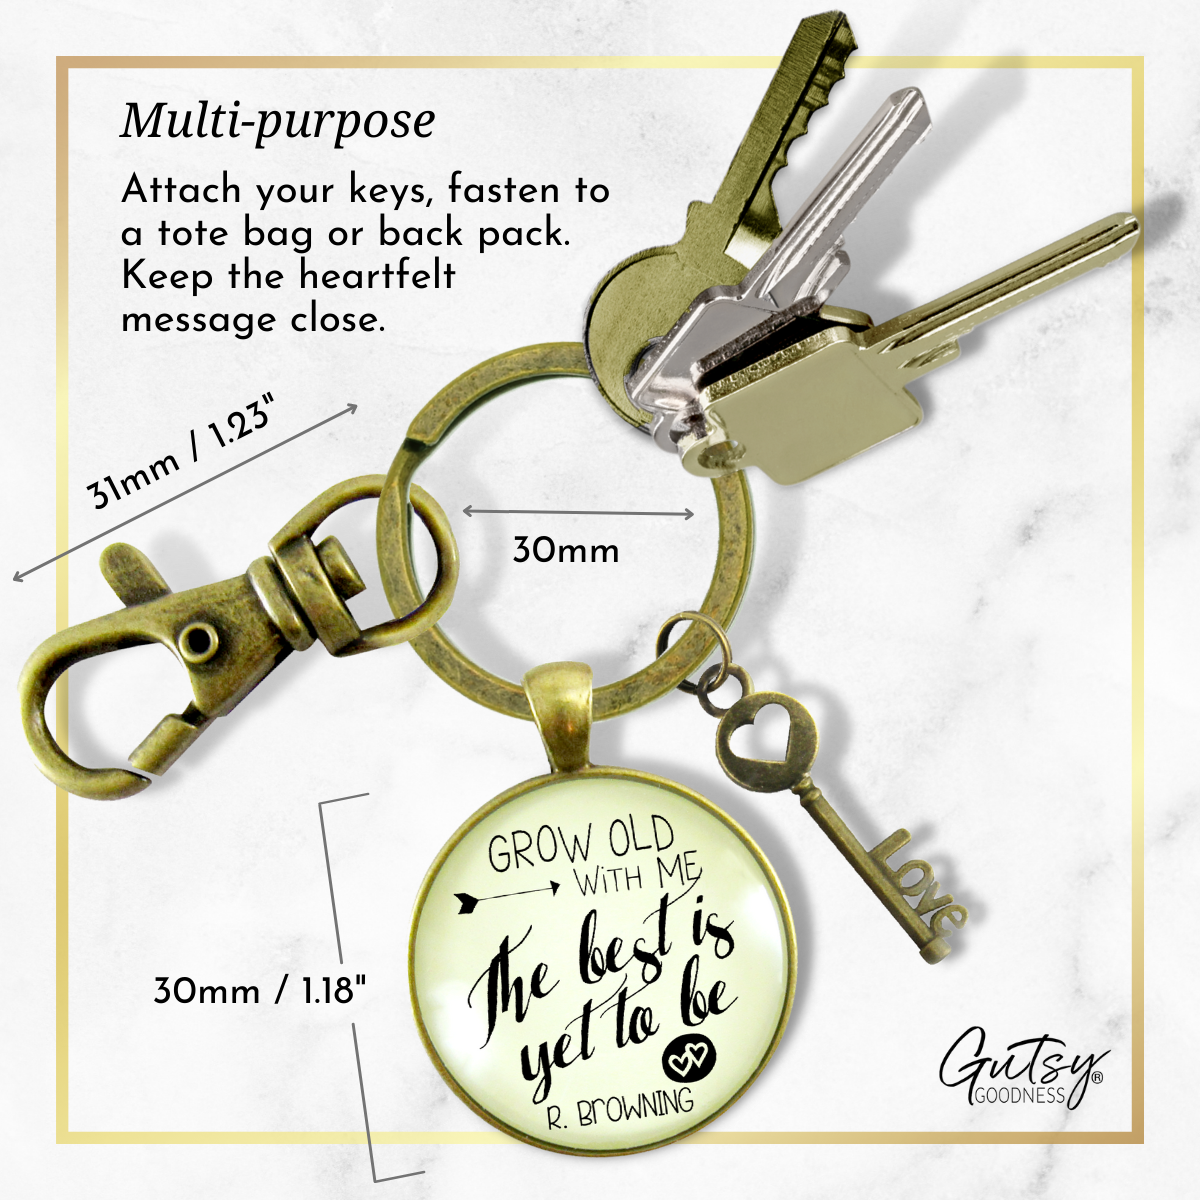 Couples Jewelry Grow Old With Me Keychain Best Yet To Be Men's Gift Style Key Chain - Gutsy Goodness Handmade Jewelry;Couples Jewelry Grow Old With Me Keychain Best Yet To Be Men's Gift Style Key Chain - Gutsy Goodness Handmade Jewelry Gifts